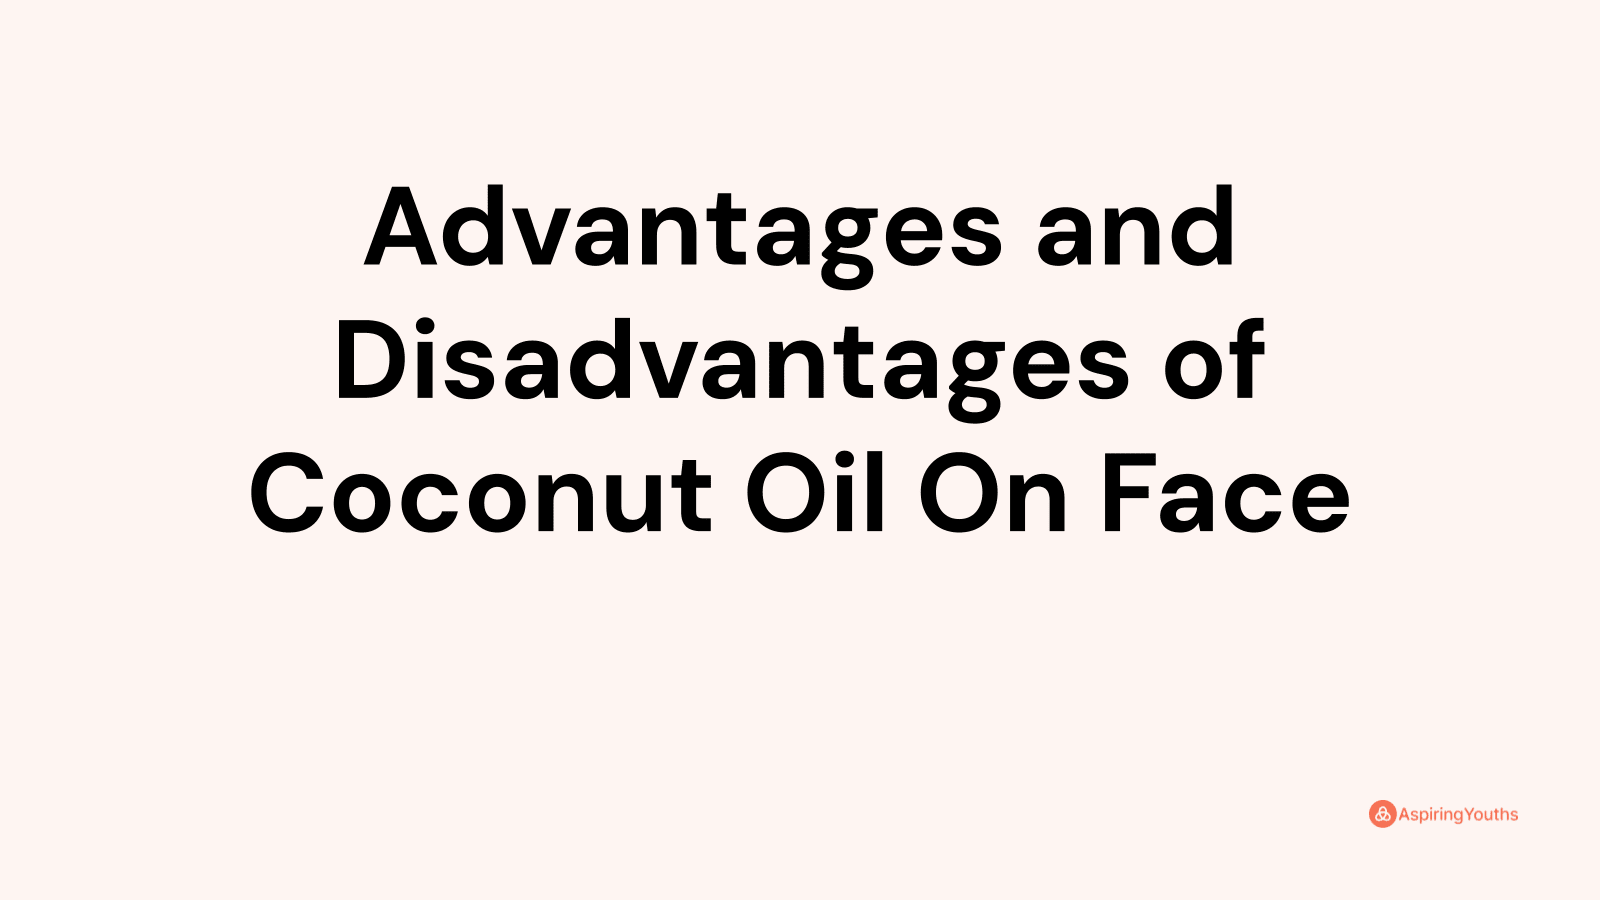 Advantages and disadvantages of Coconut Oil On Face